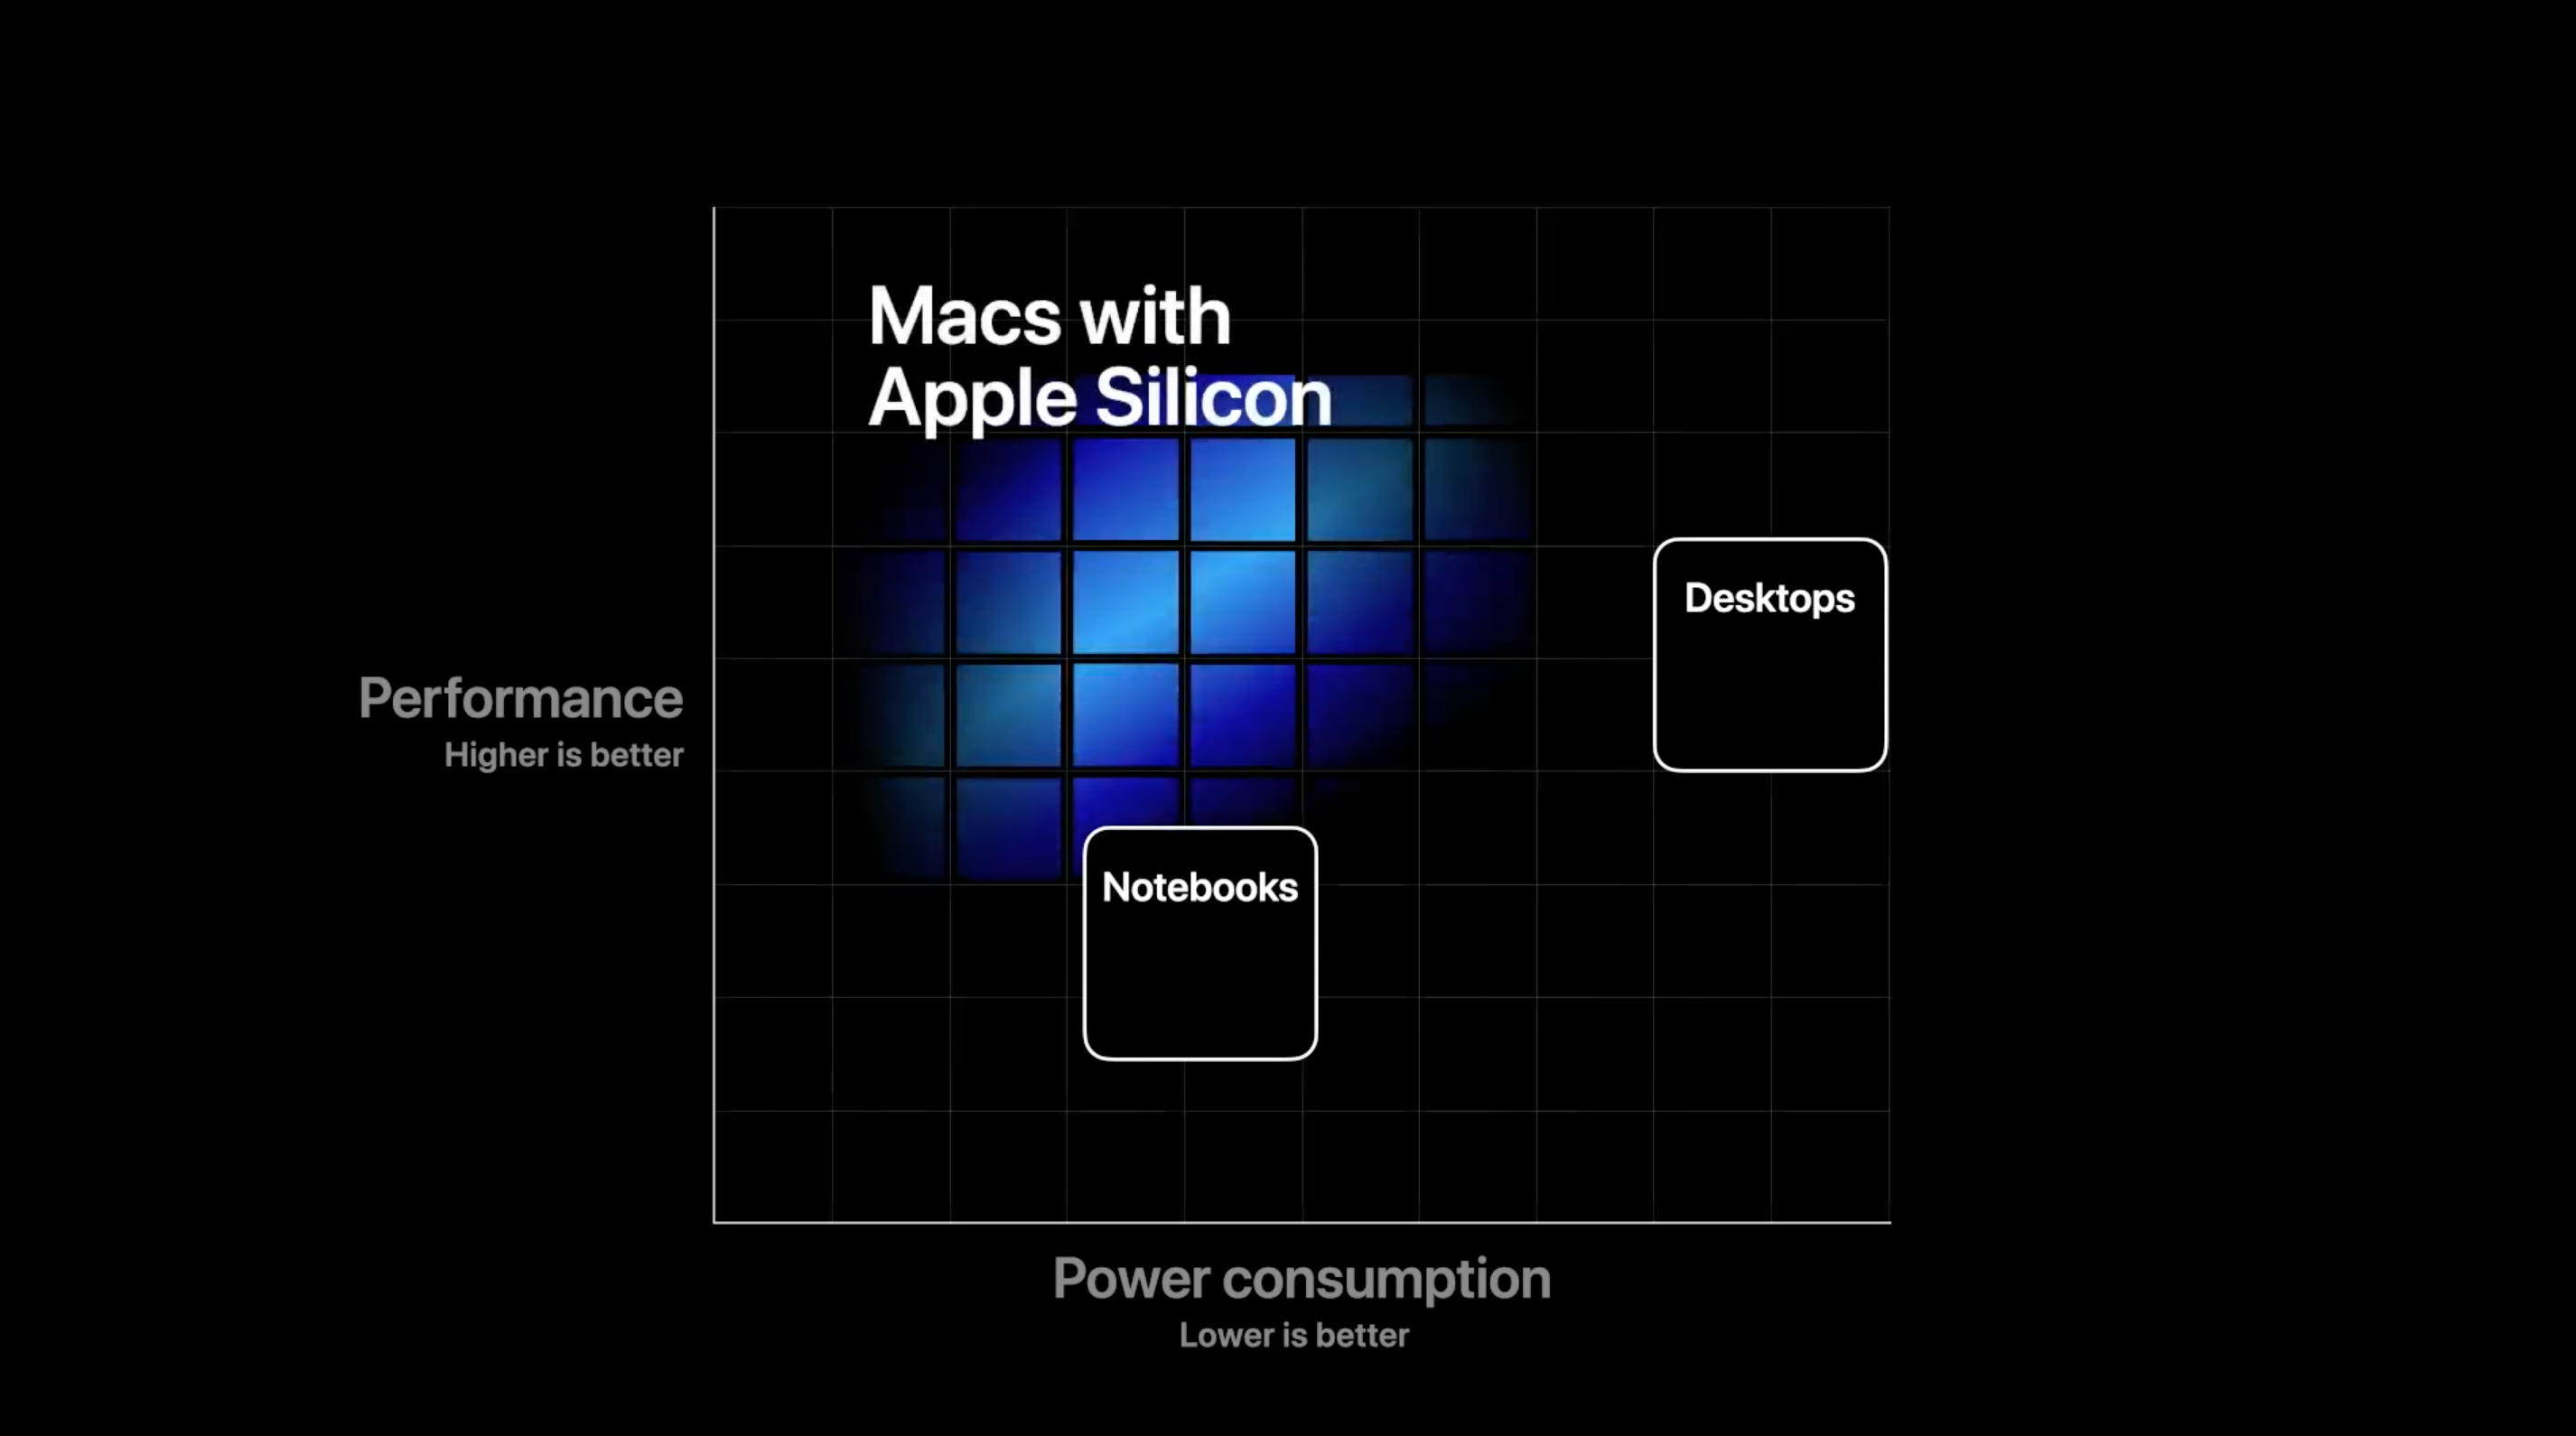 Apple Silicon Is Apples Effort To Bring Its Own Processors To The Mac As Well As Iphone And Ipad image 3